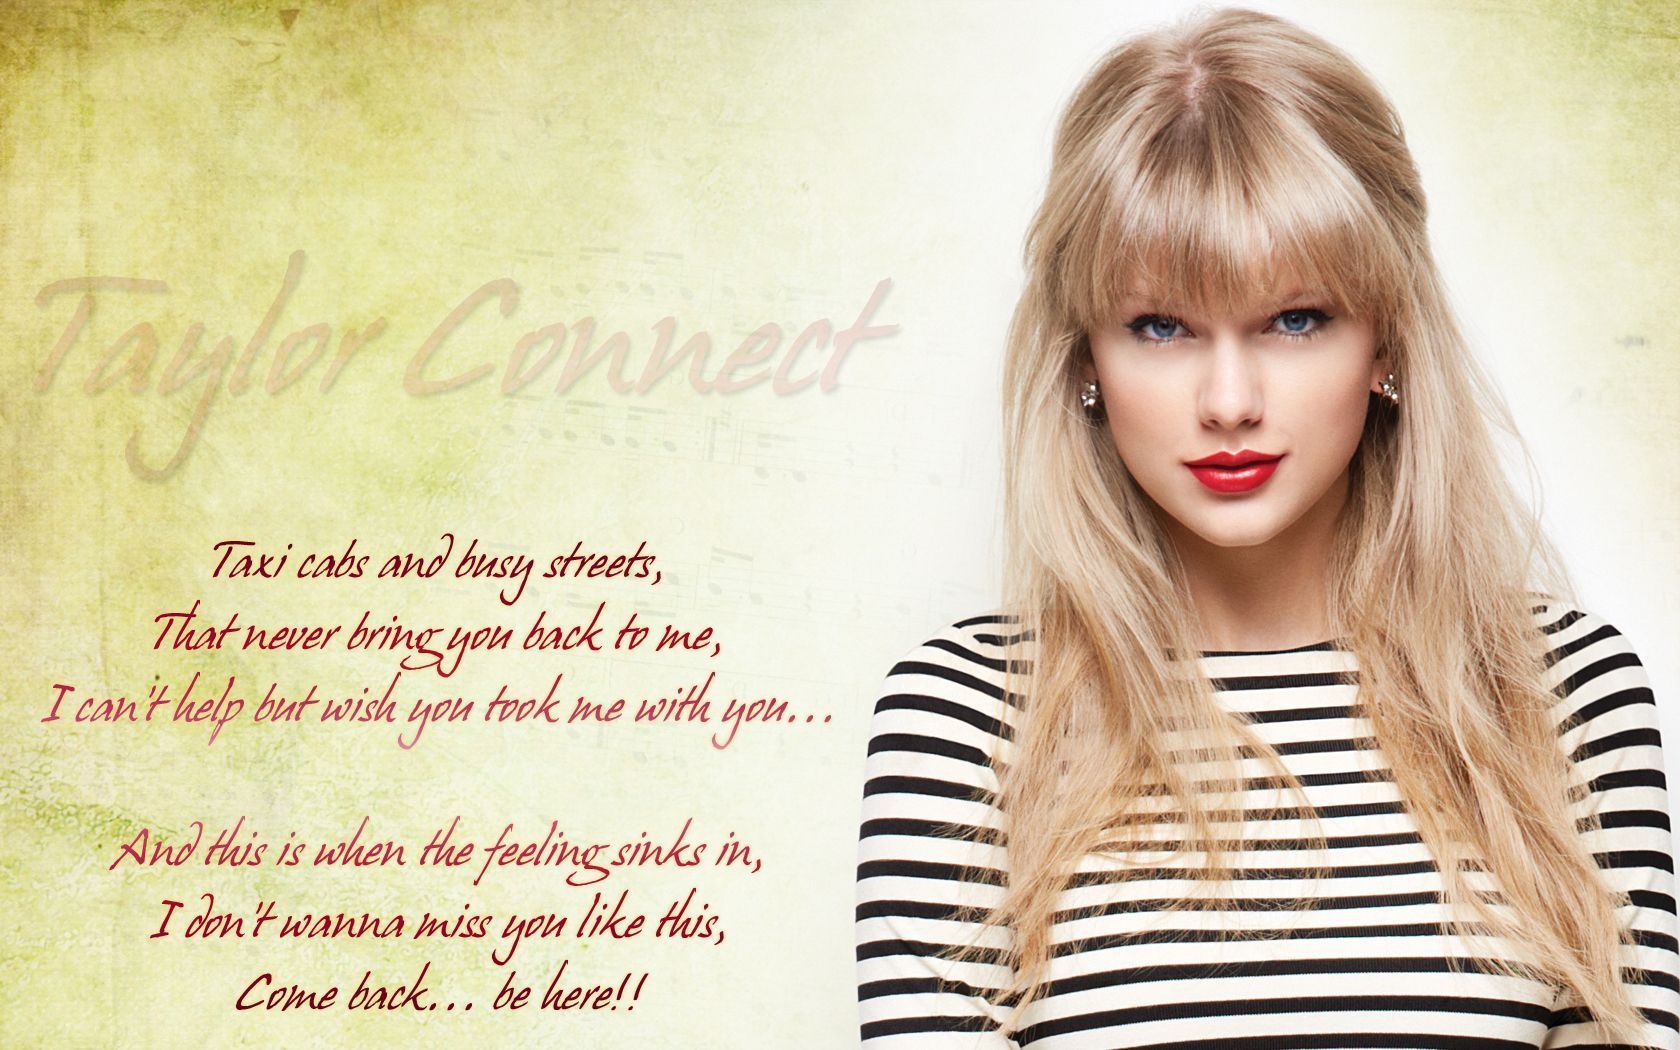 My RED Wallpaper of Taylor - updated 03 30 13, Taylor Swift